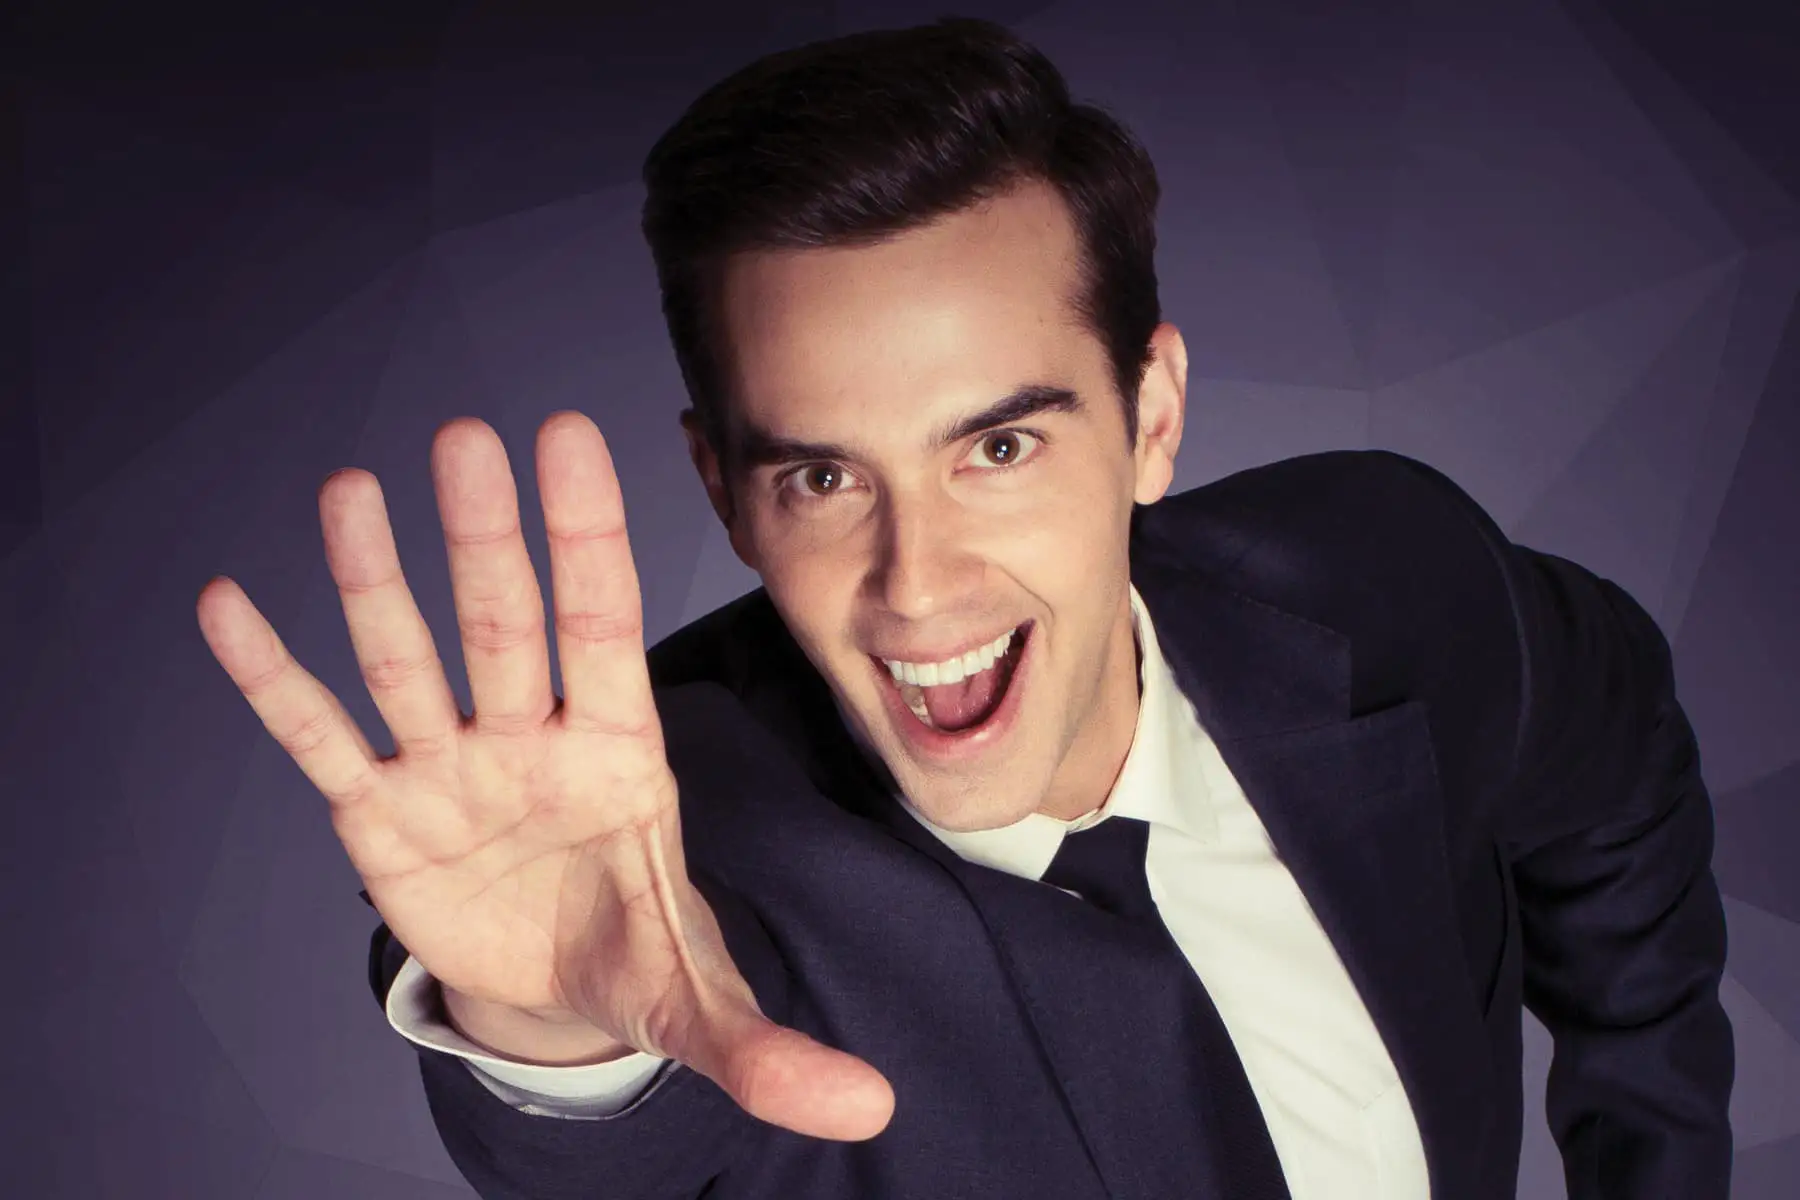 Michael Carbonaro with hand outstretched towards the camera